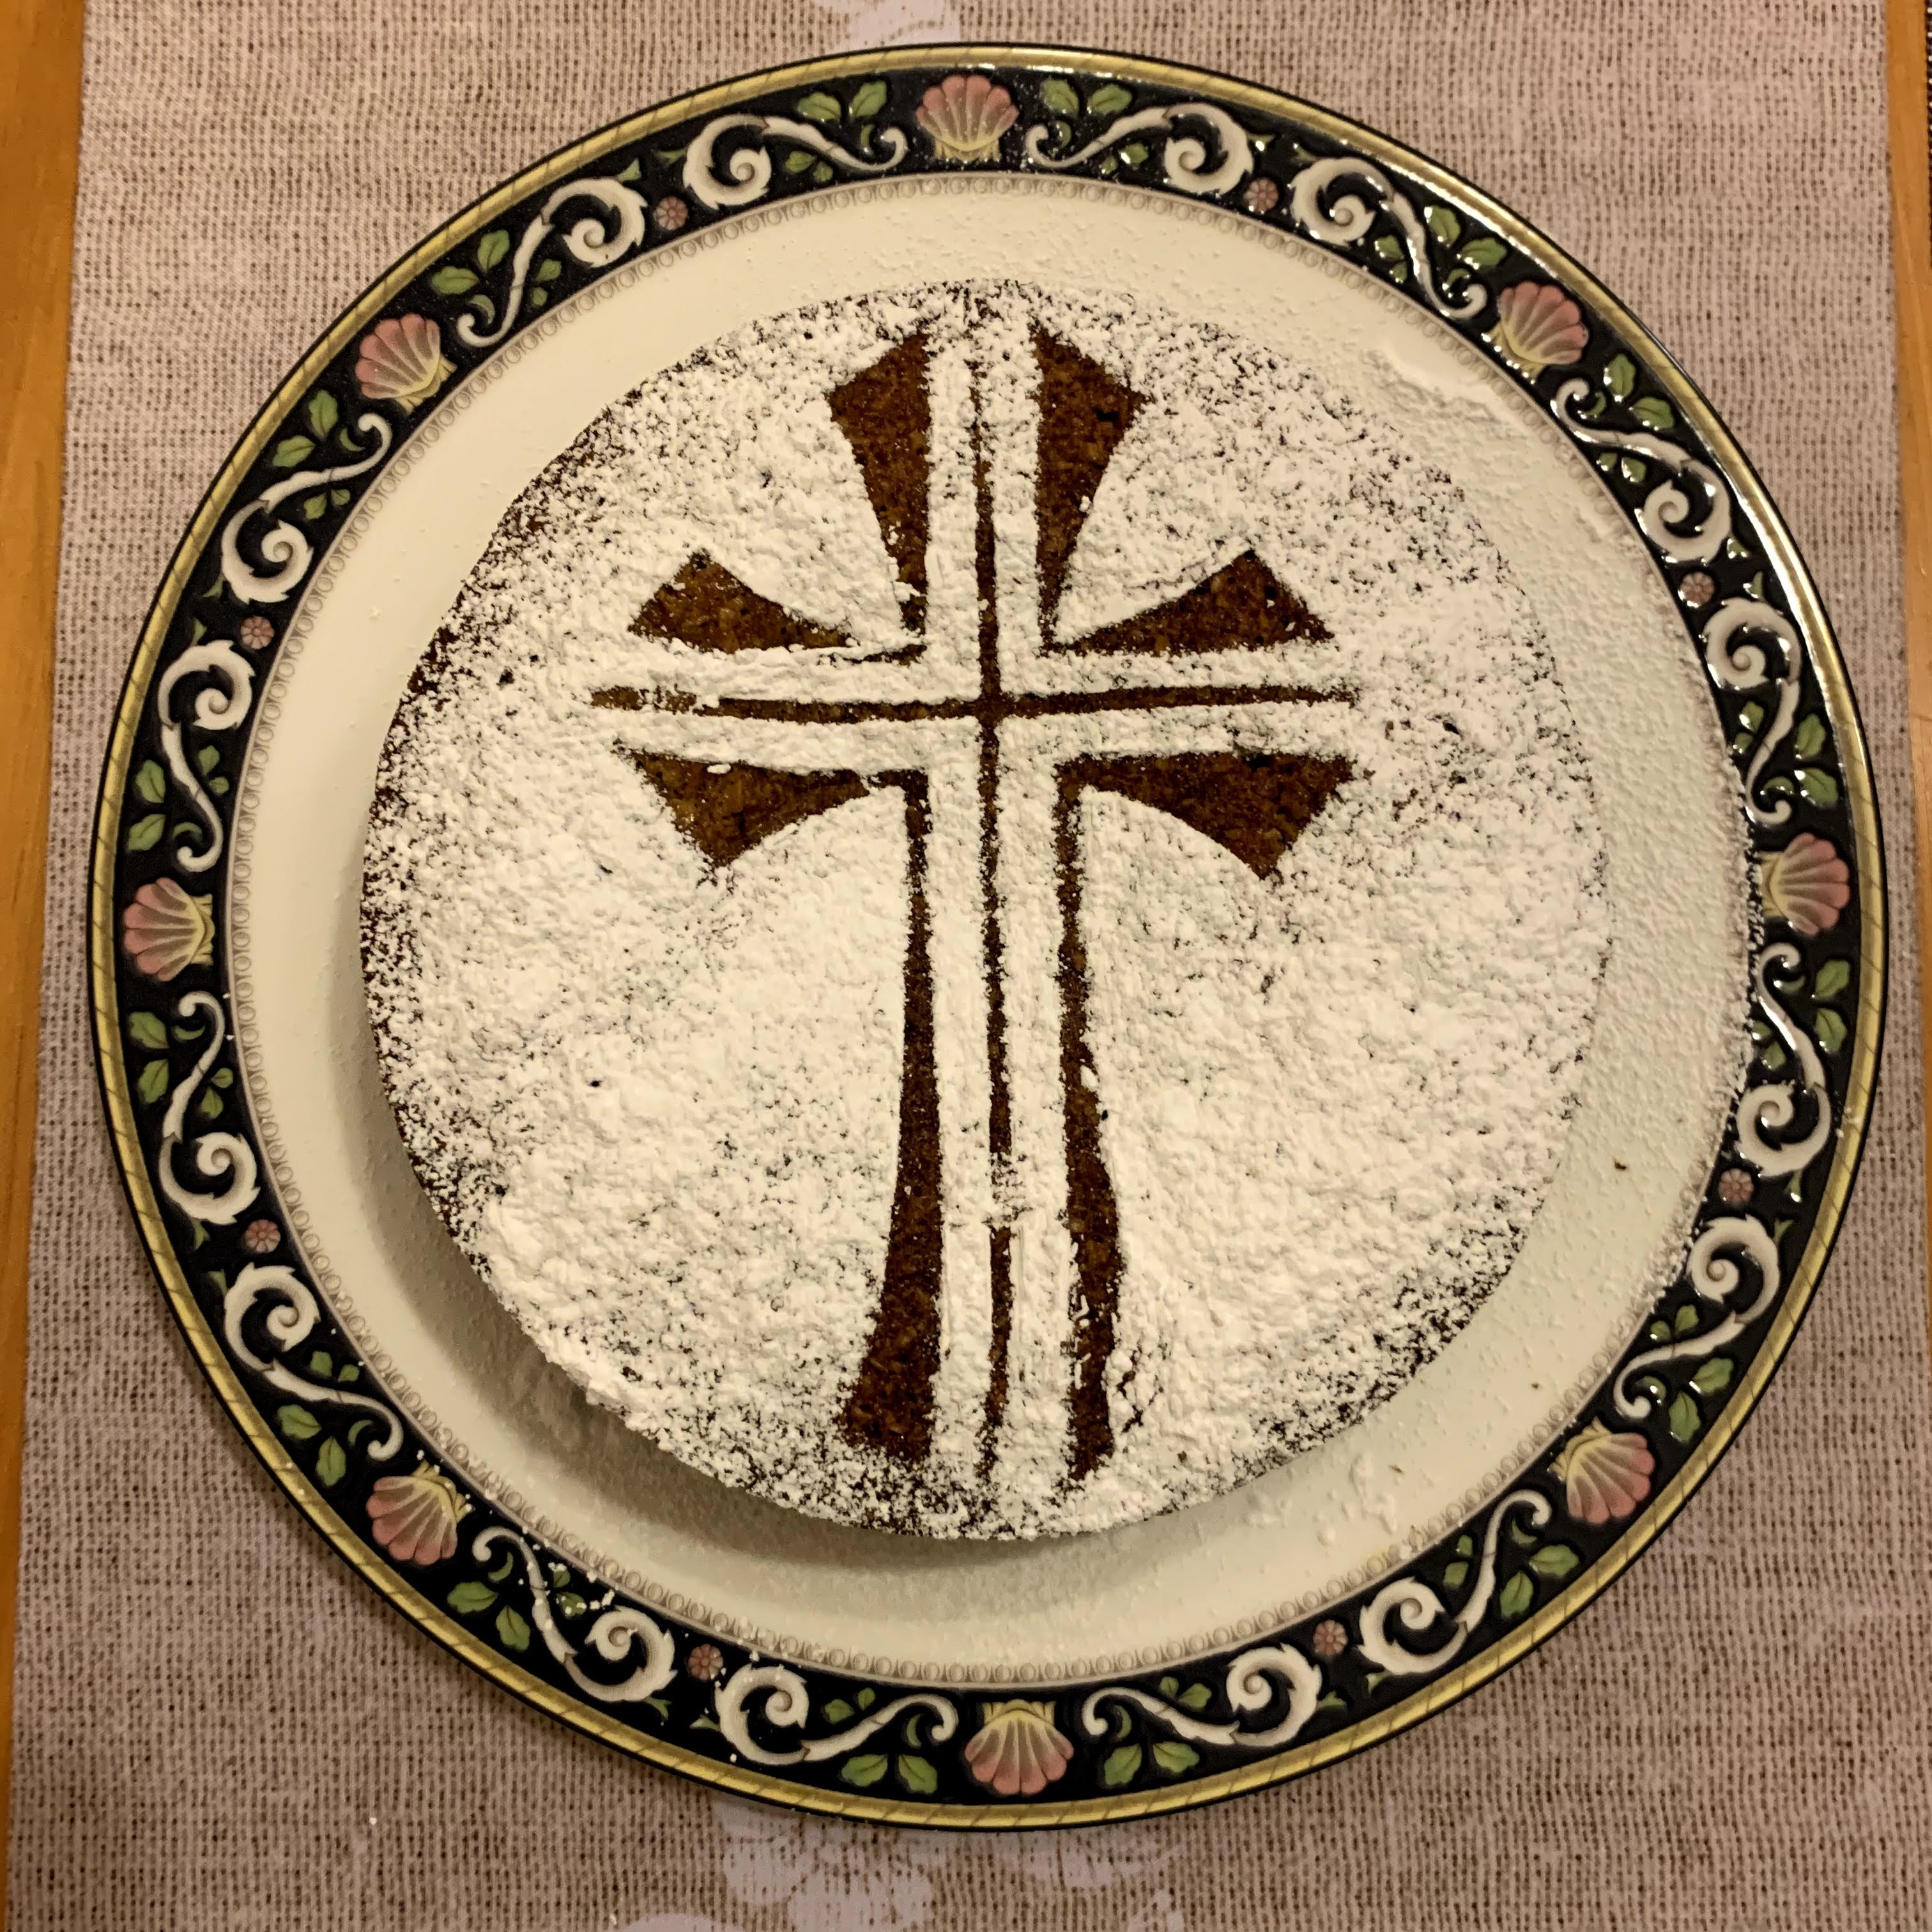 carrot cake with icing sugar in the shape of a cross